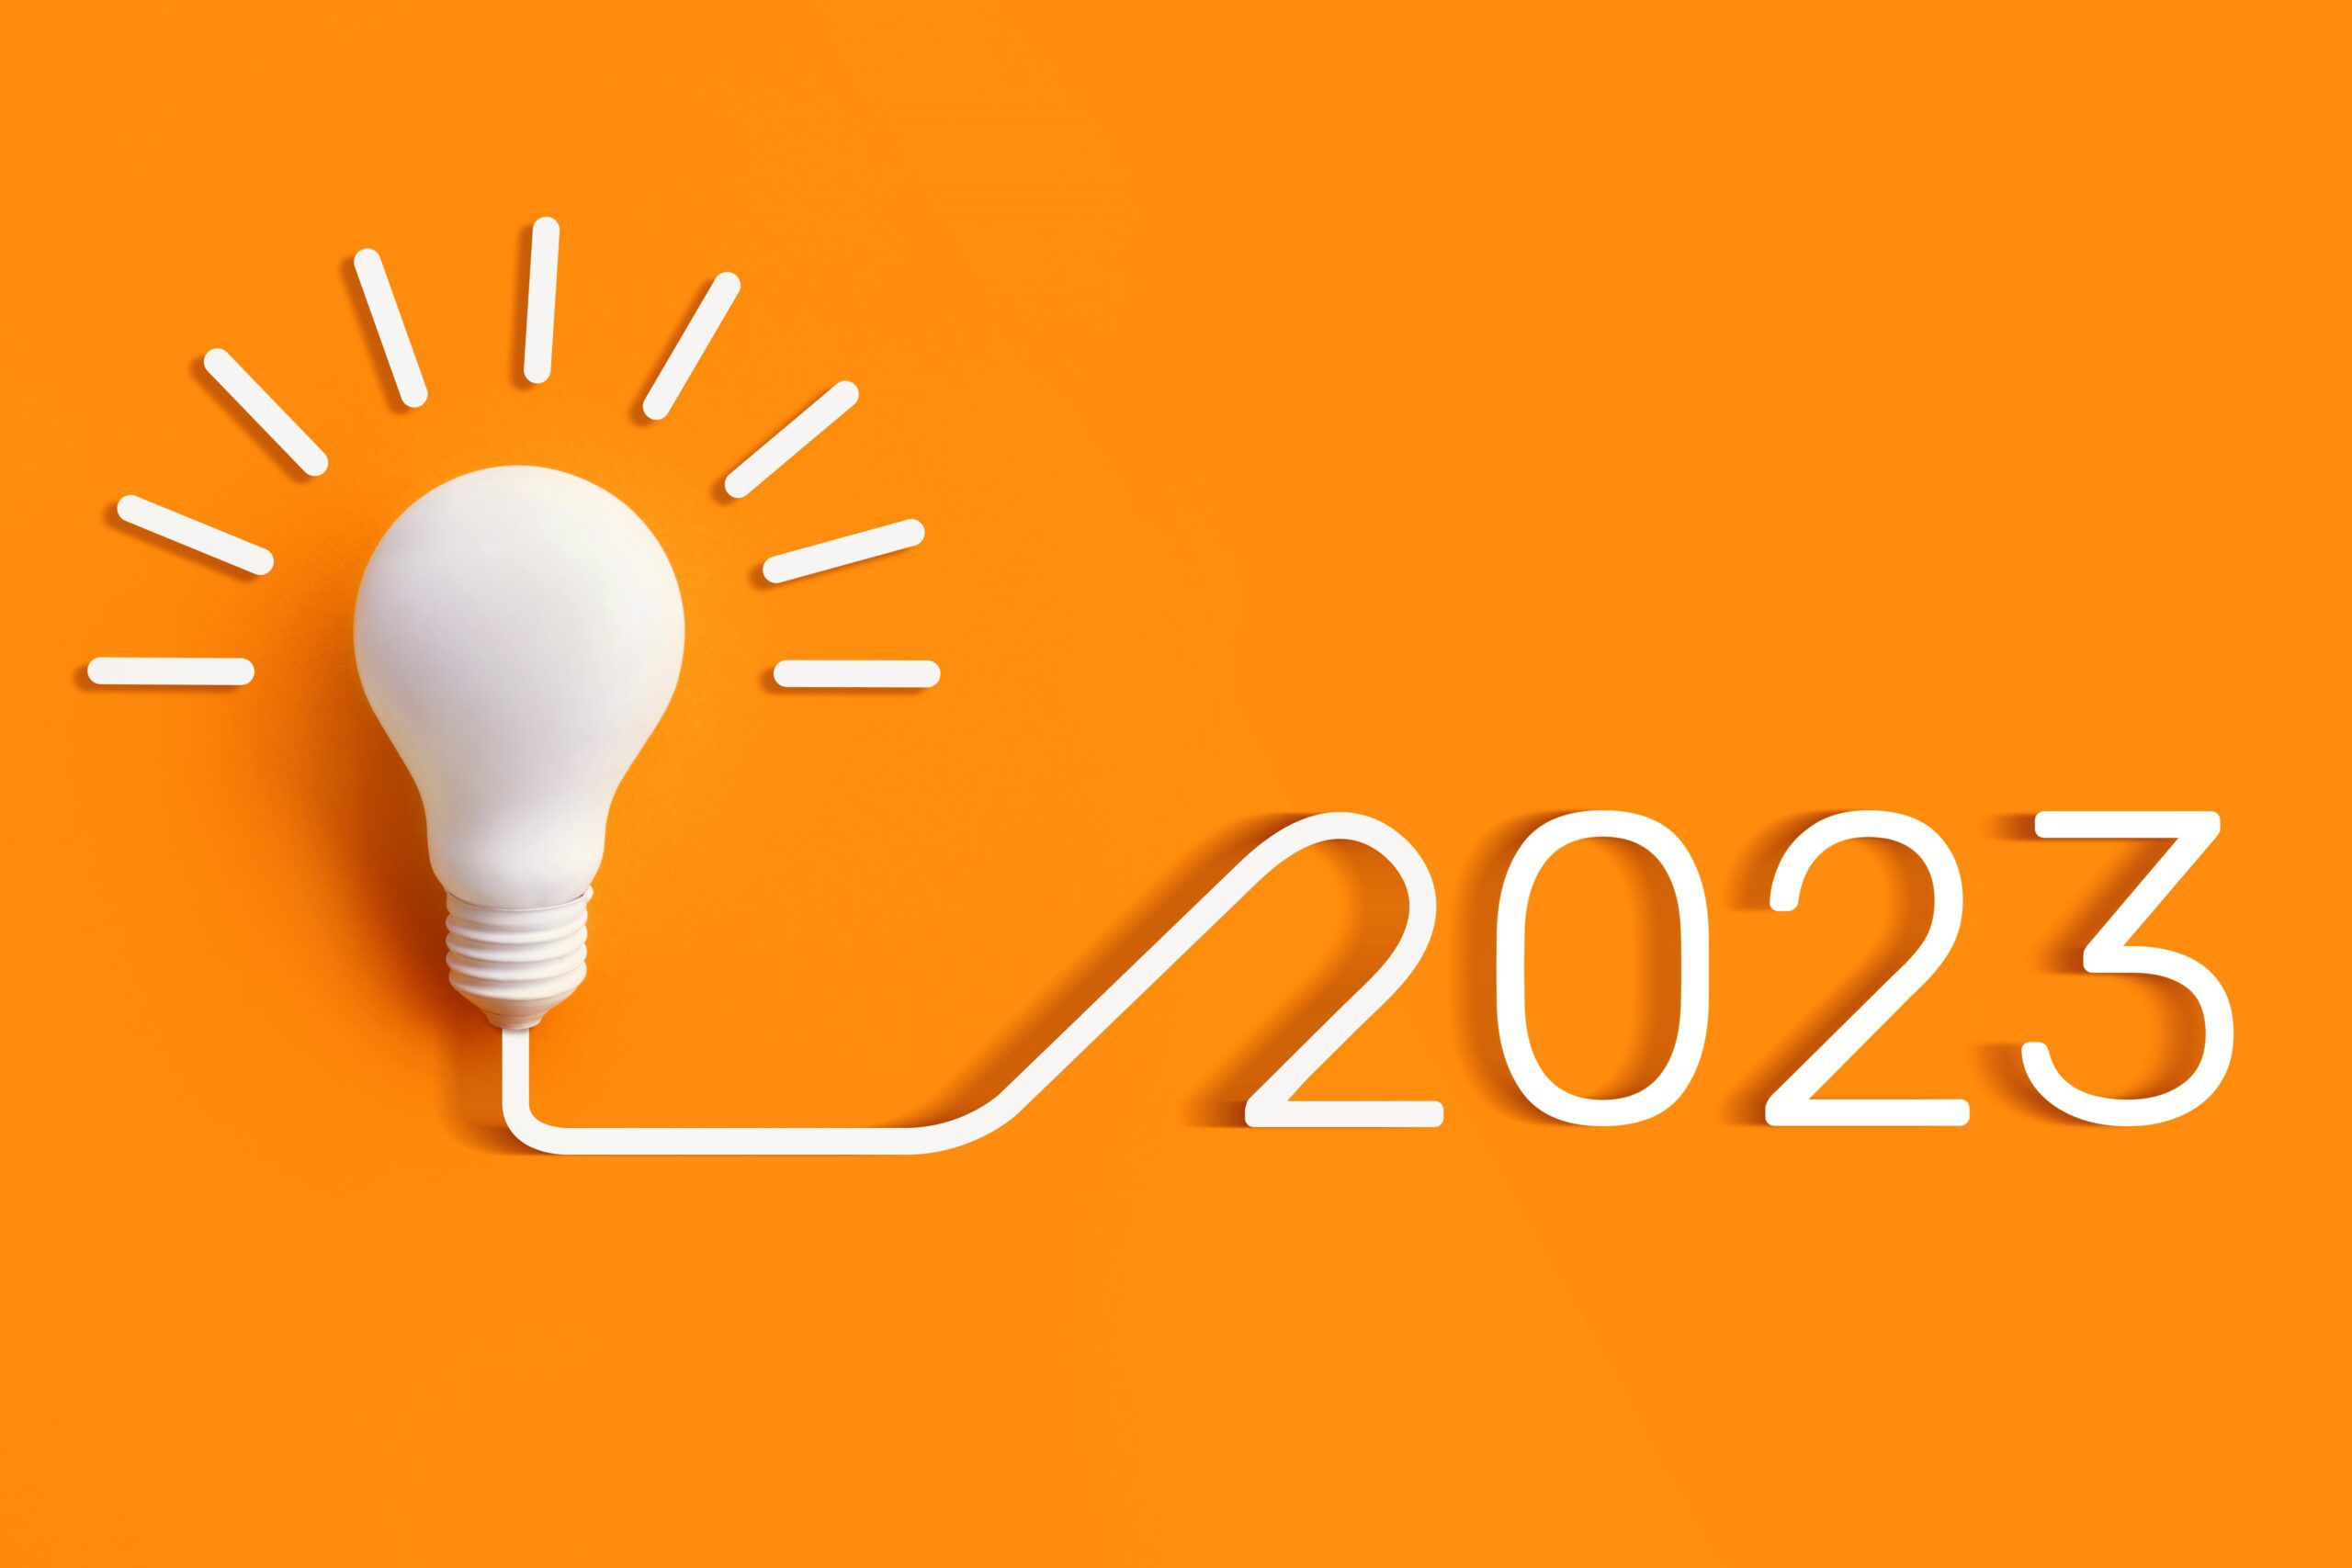 6 best small business ideas for 2023